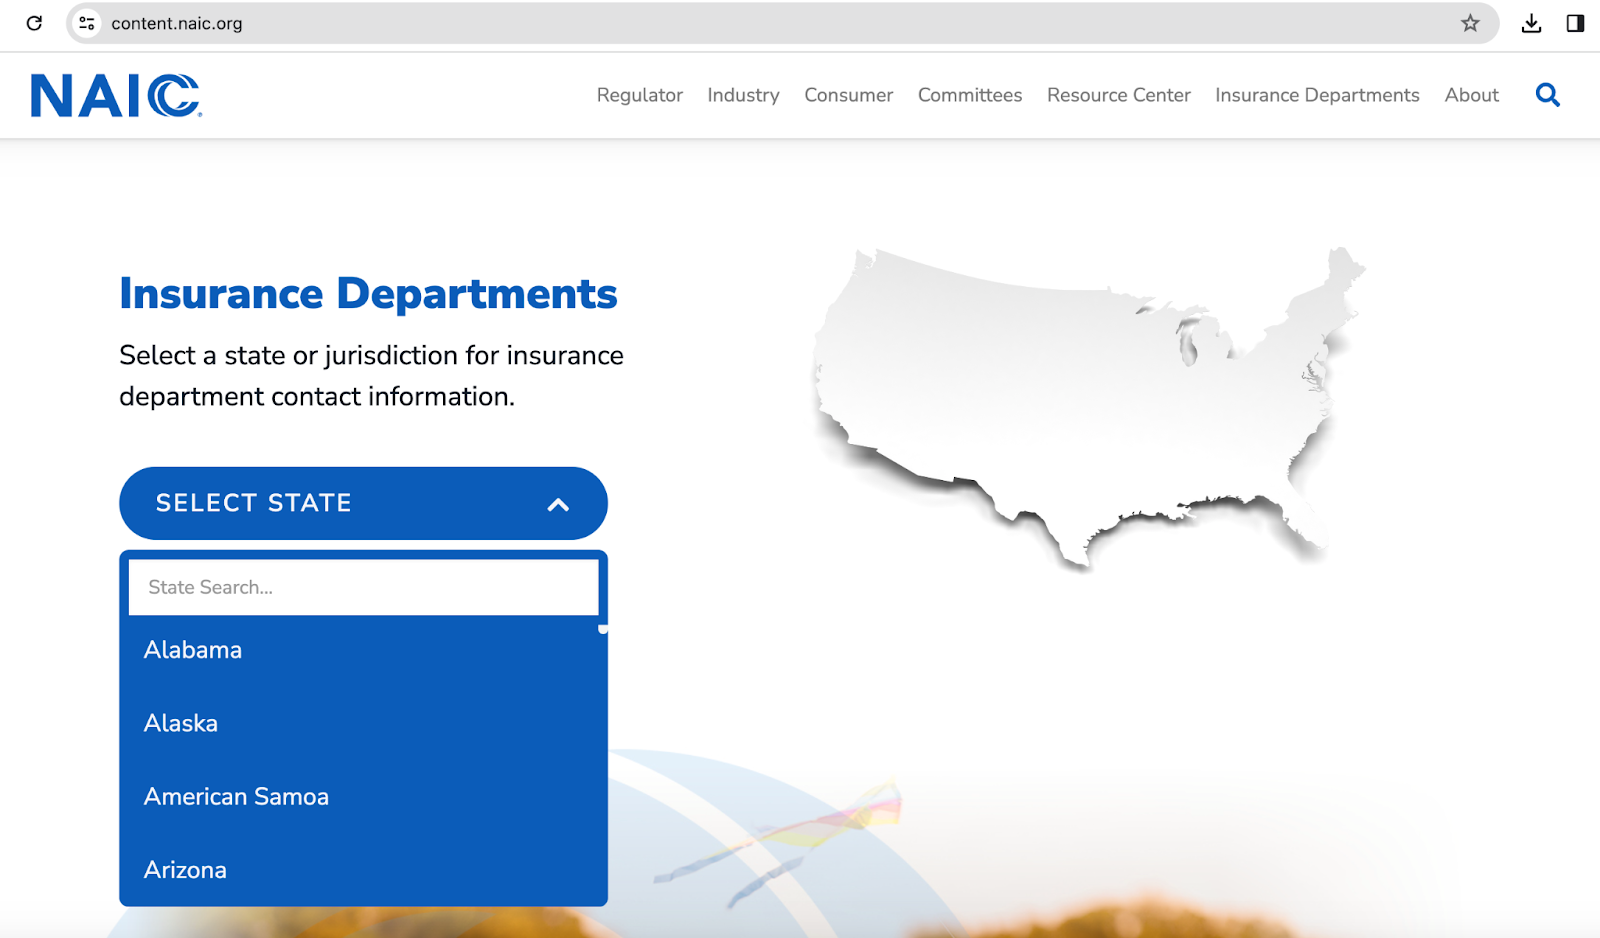 Screen cap from the NAIC website showing a dropdown where you can select a state of jurisdiction to search for insurance contact information.